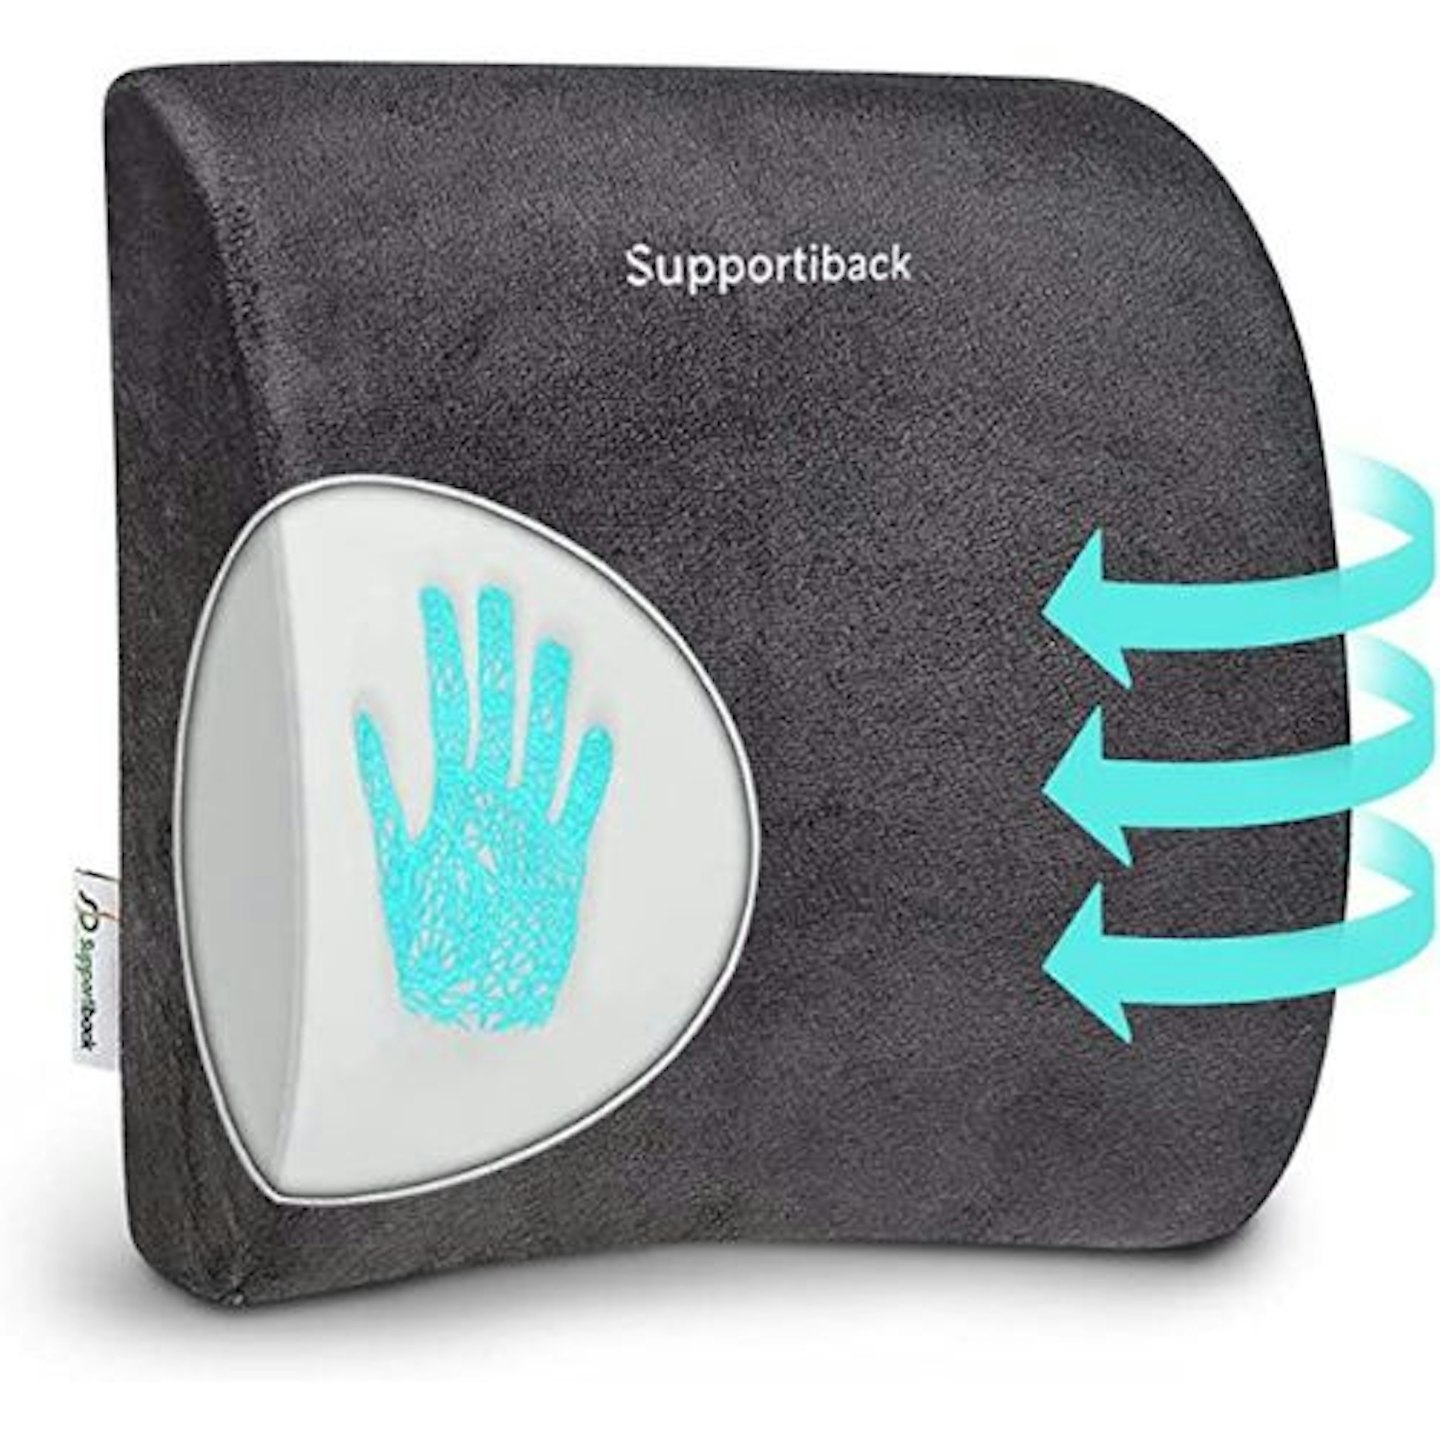 Proven Benefits of Using Lumbar Support Back Cushions – Everlasting Comfort